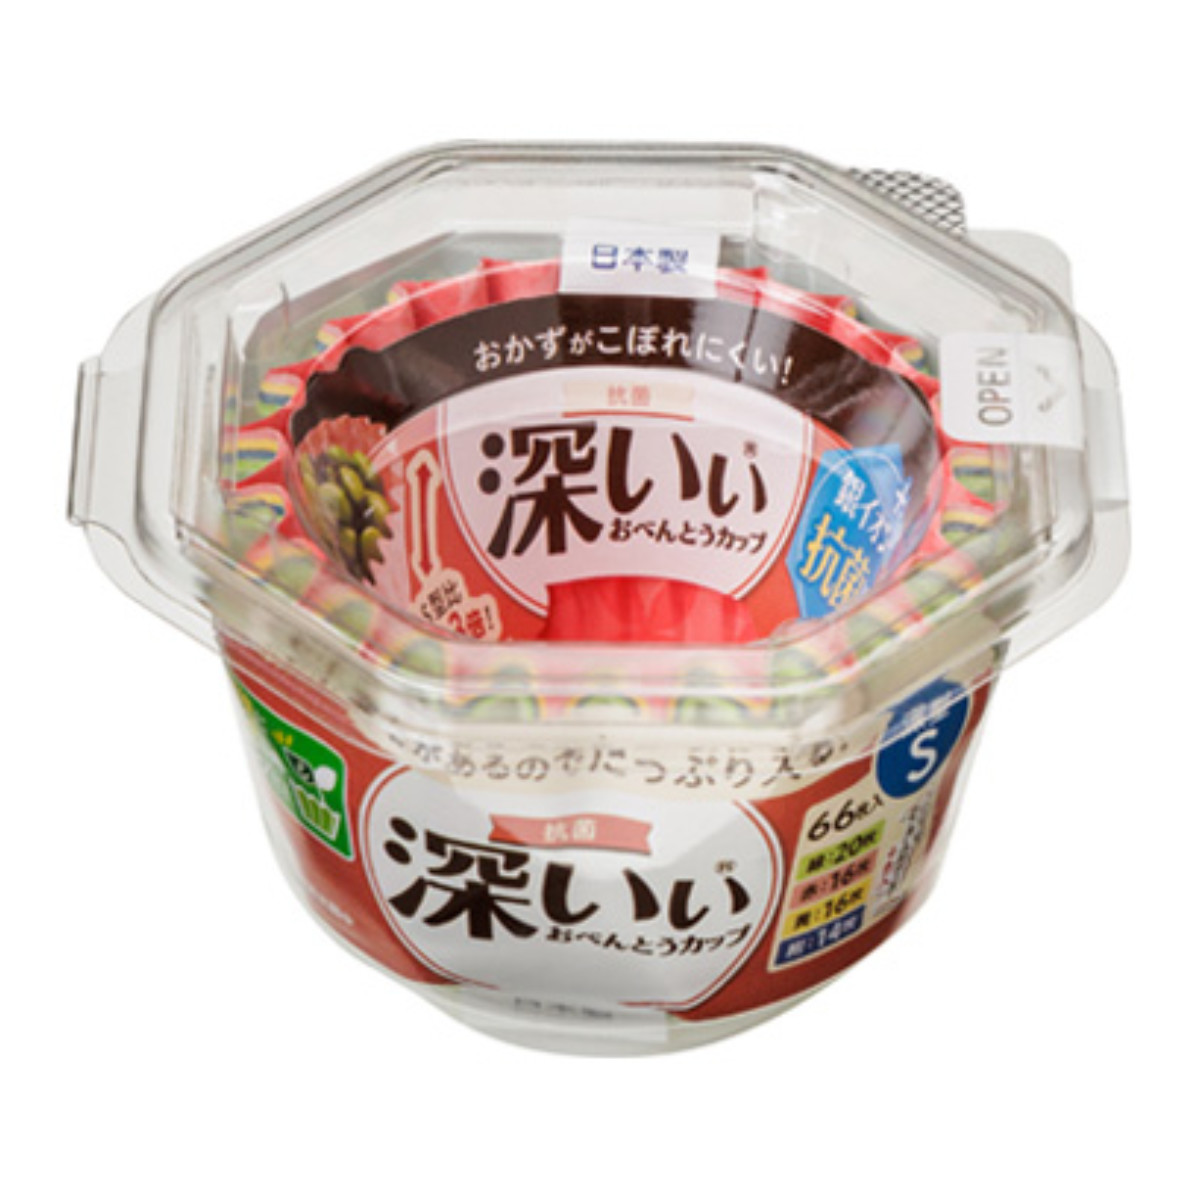  side dish cup 66 sheets entering deep type S size anti-bacterial (.. present cup anti-bacterial processing 66 piece entering side dish inserting . present child made in Japan )